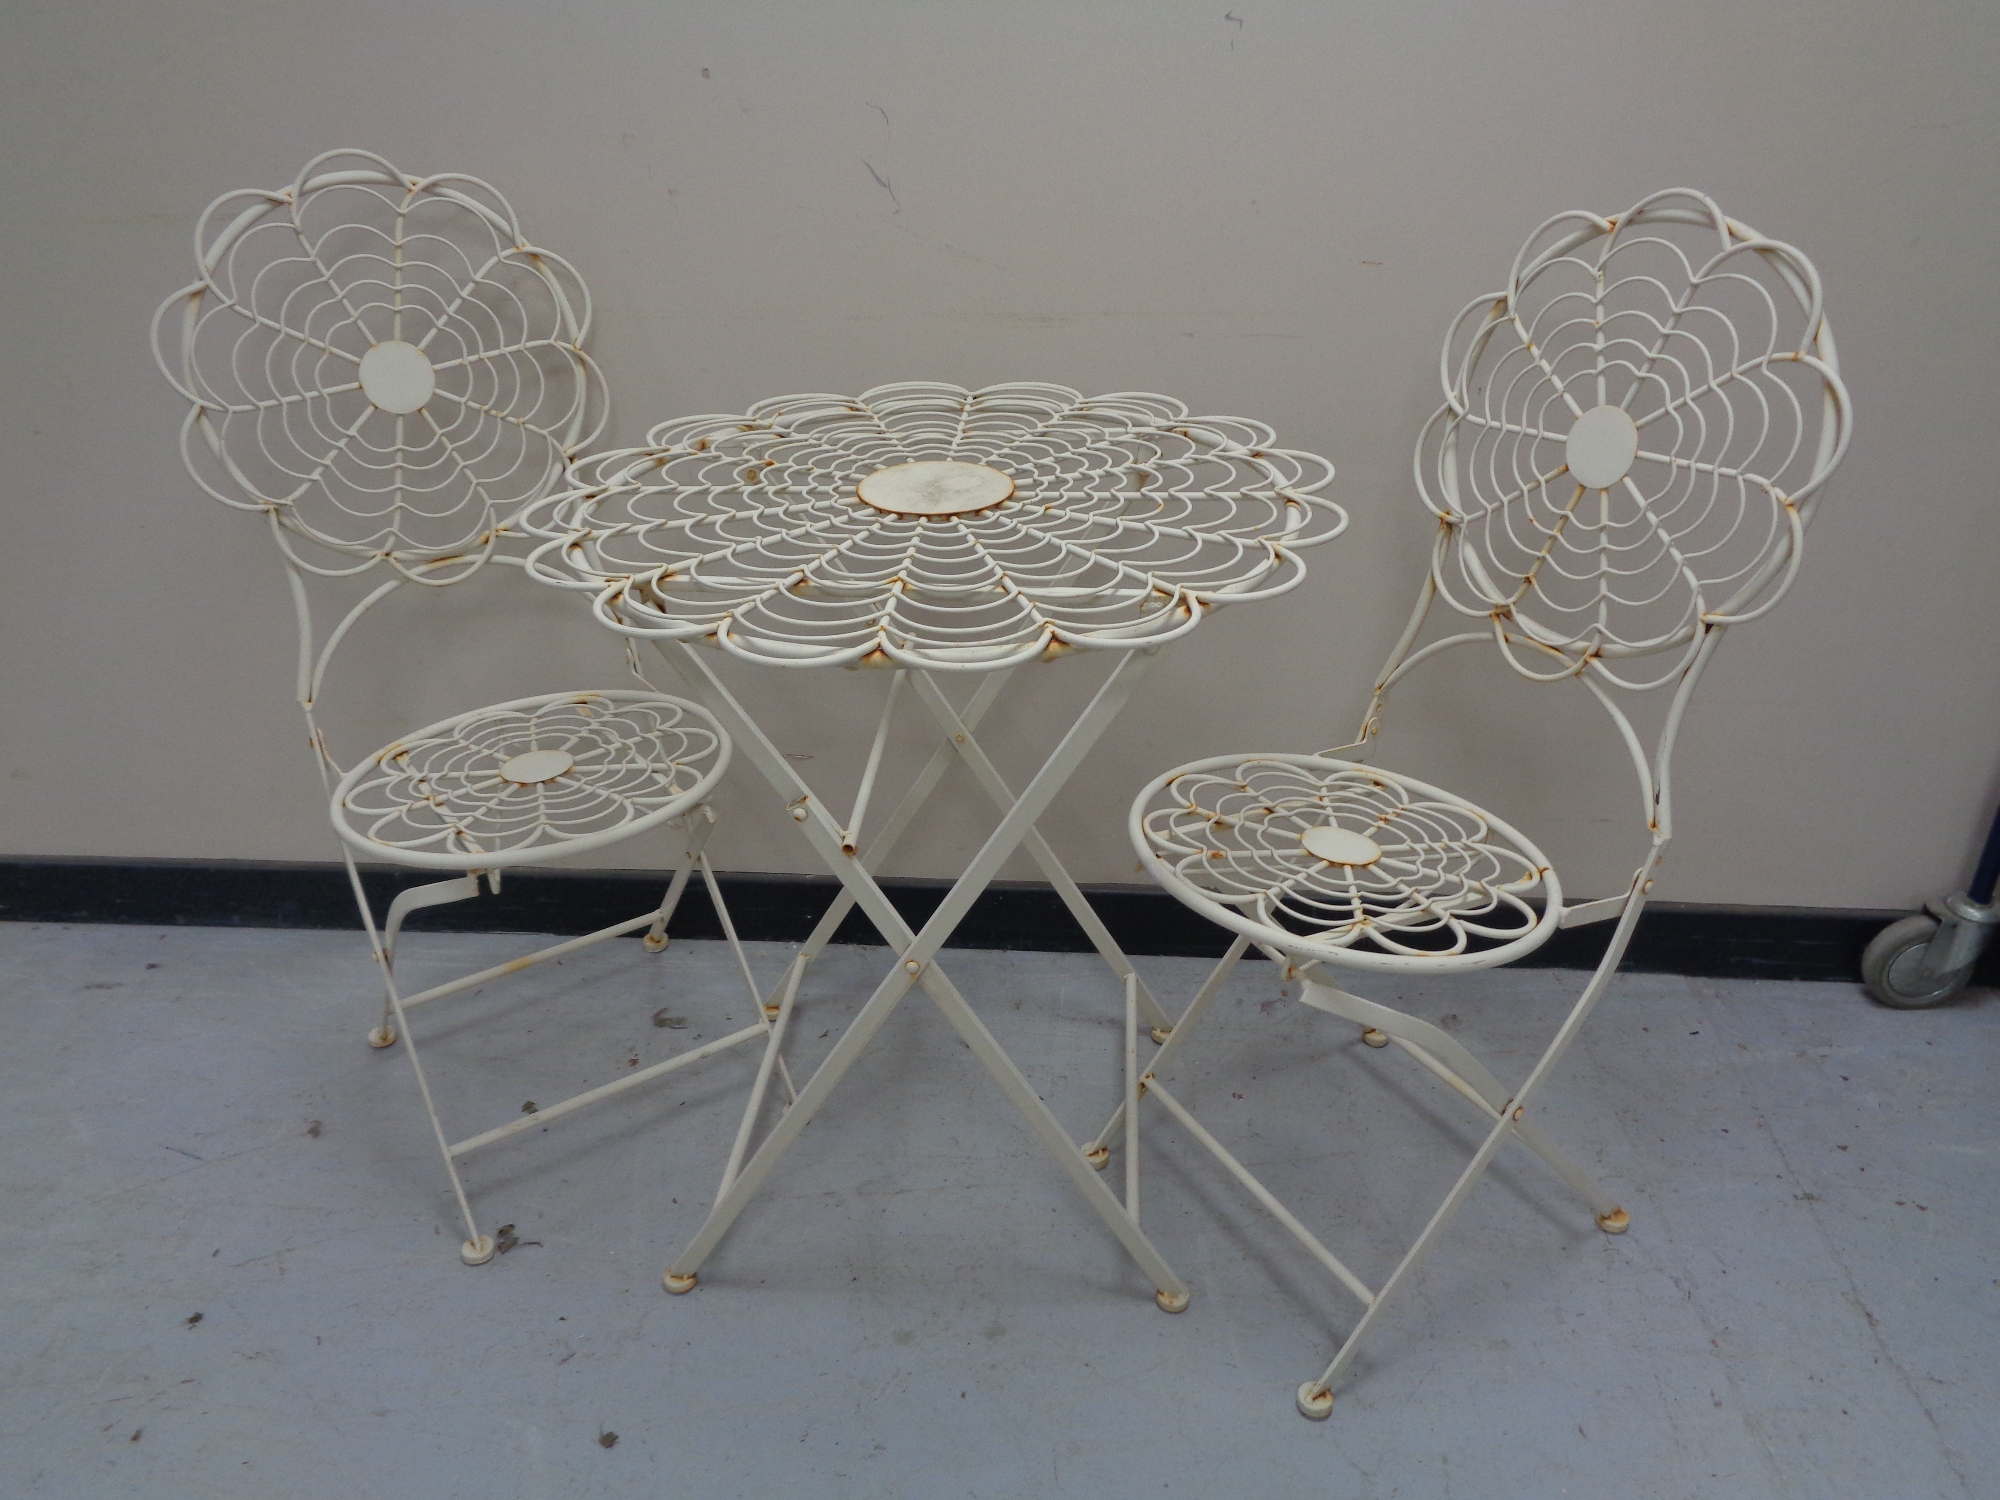 A folding metal patio table and two chairs (white).